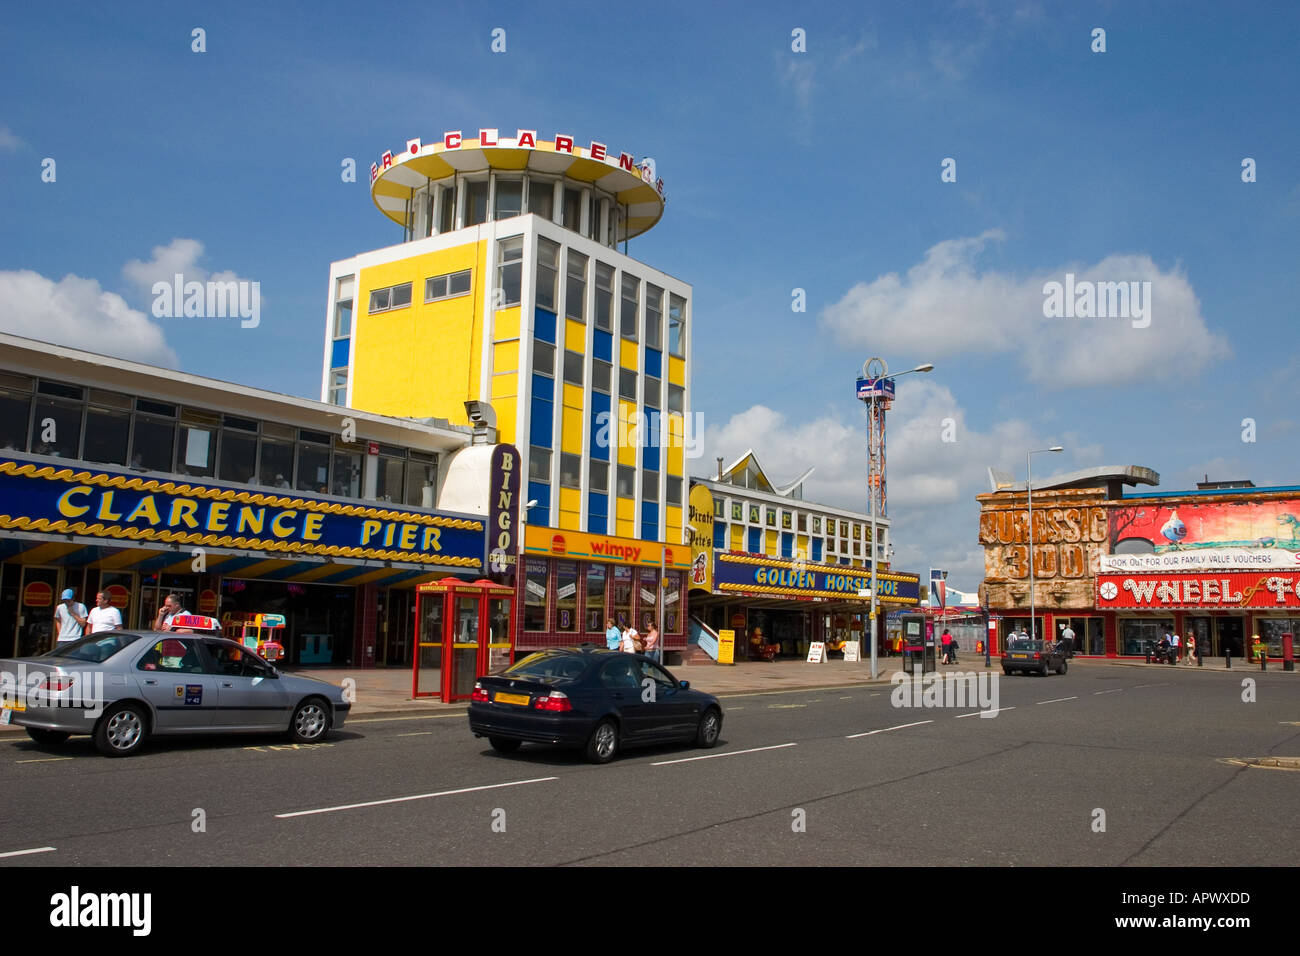 Clarence Pier in 2004 Southsea Portsmouth Hampshire großbritannien Stockfoto